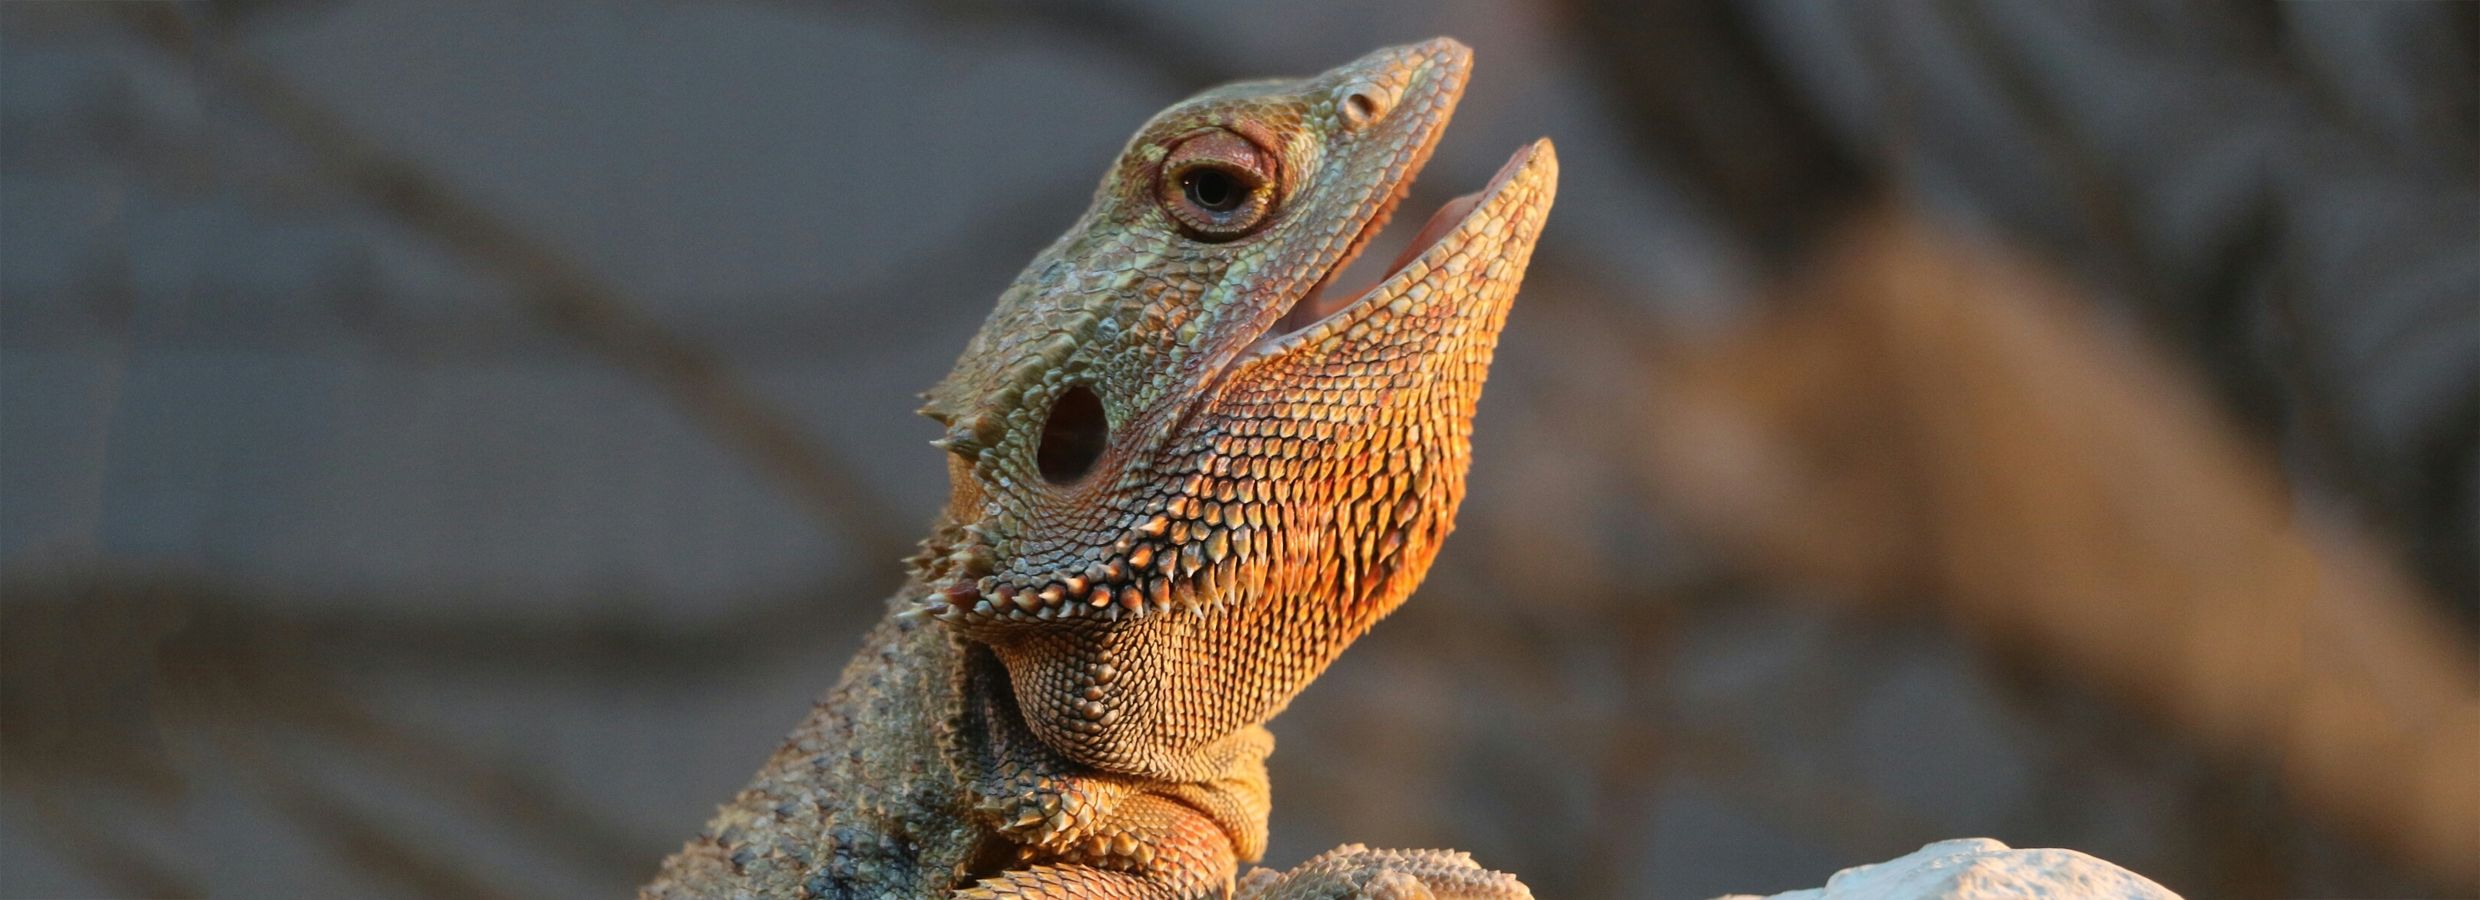 The Complete Bearded Dragon Care Sheet » Tips, Guidelines, & More